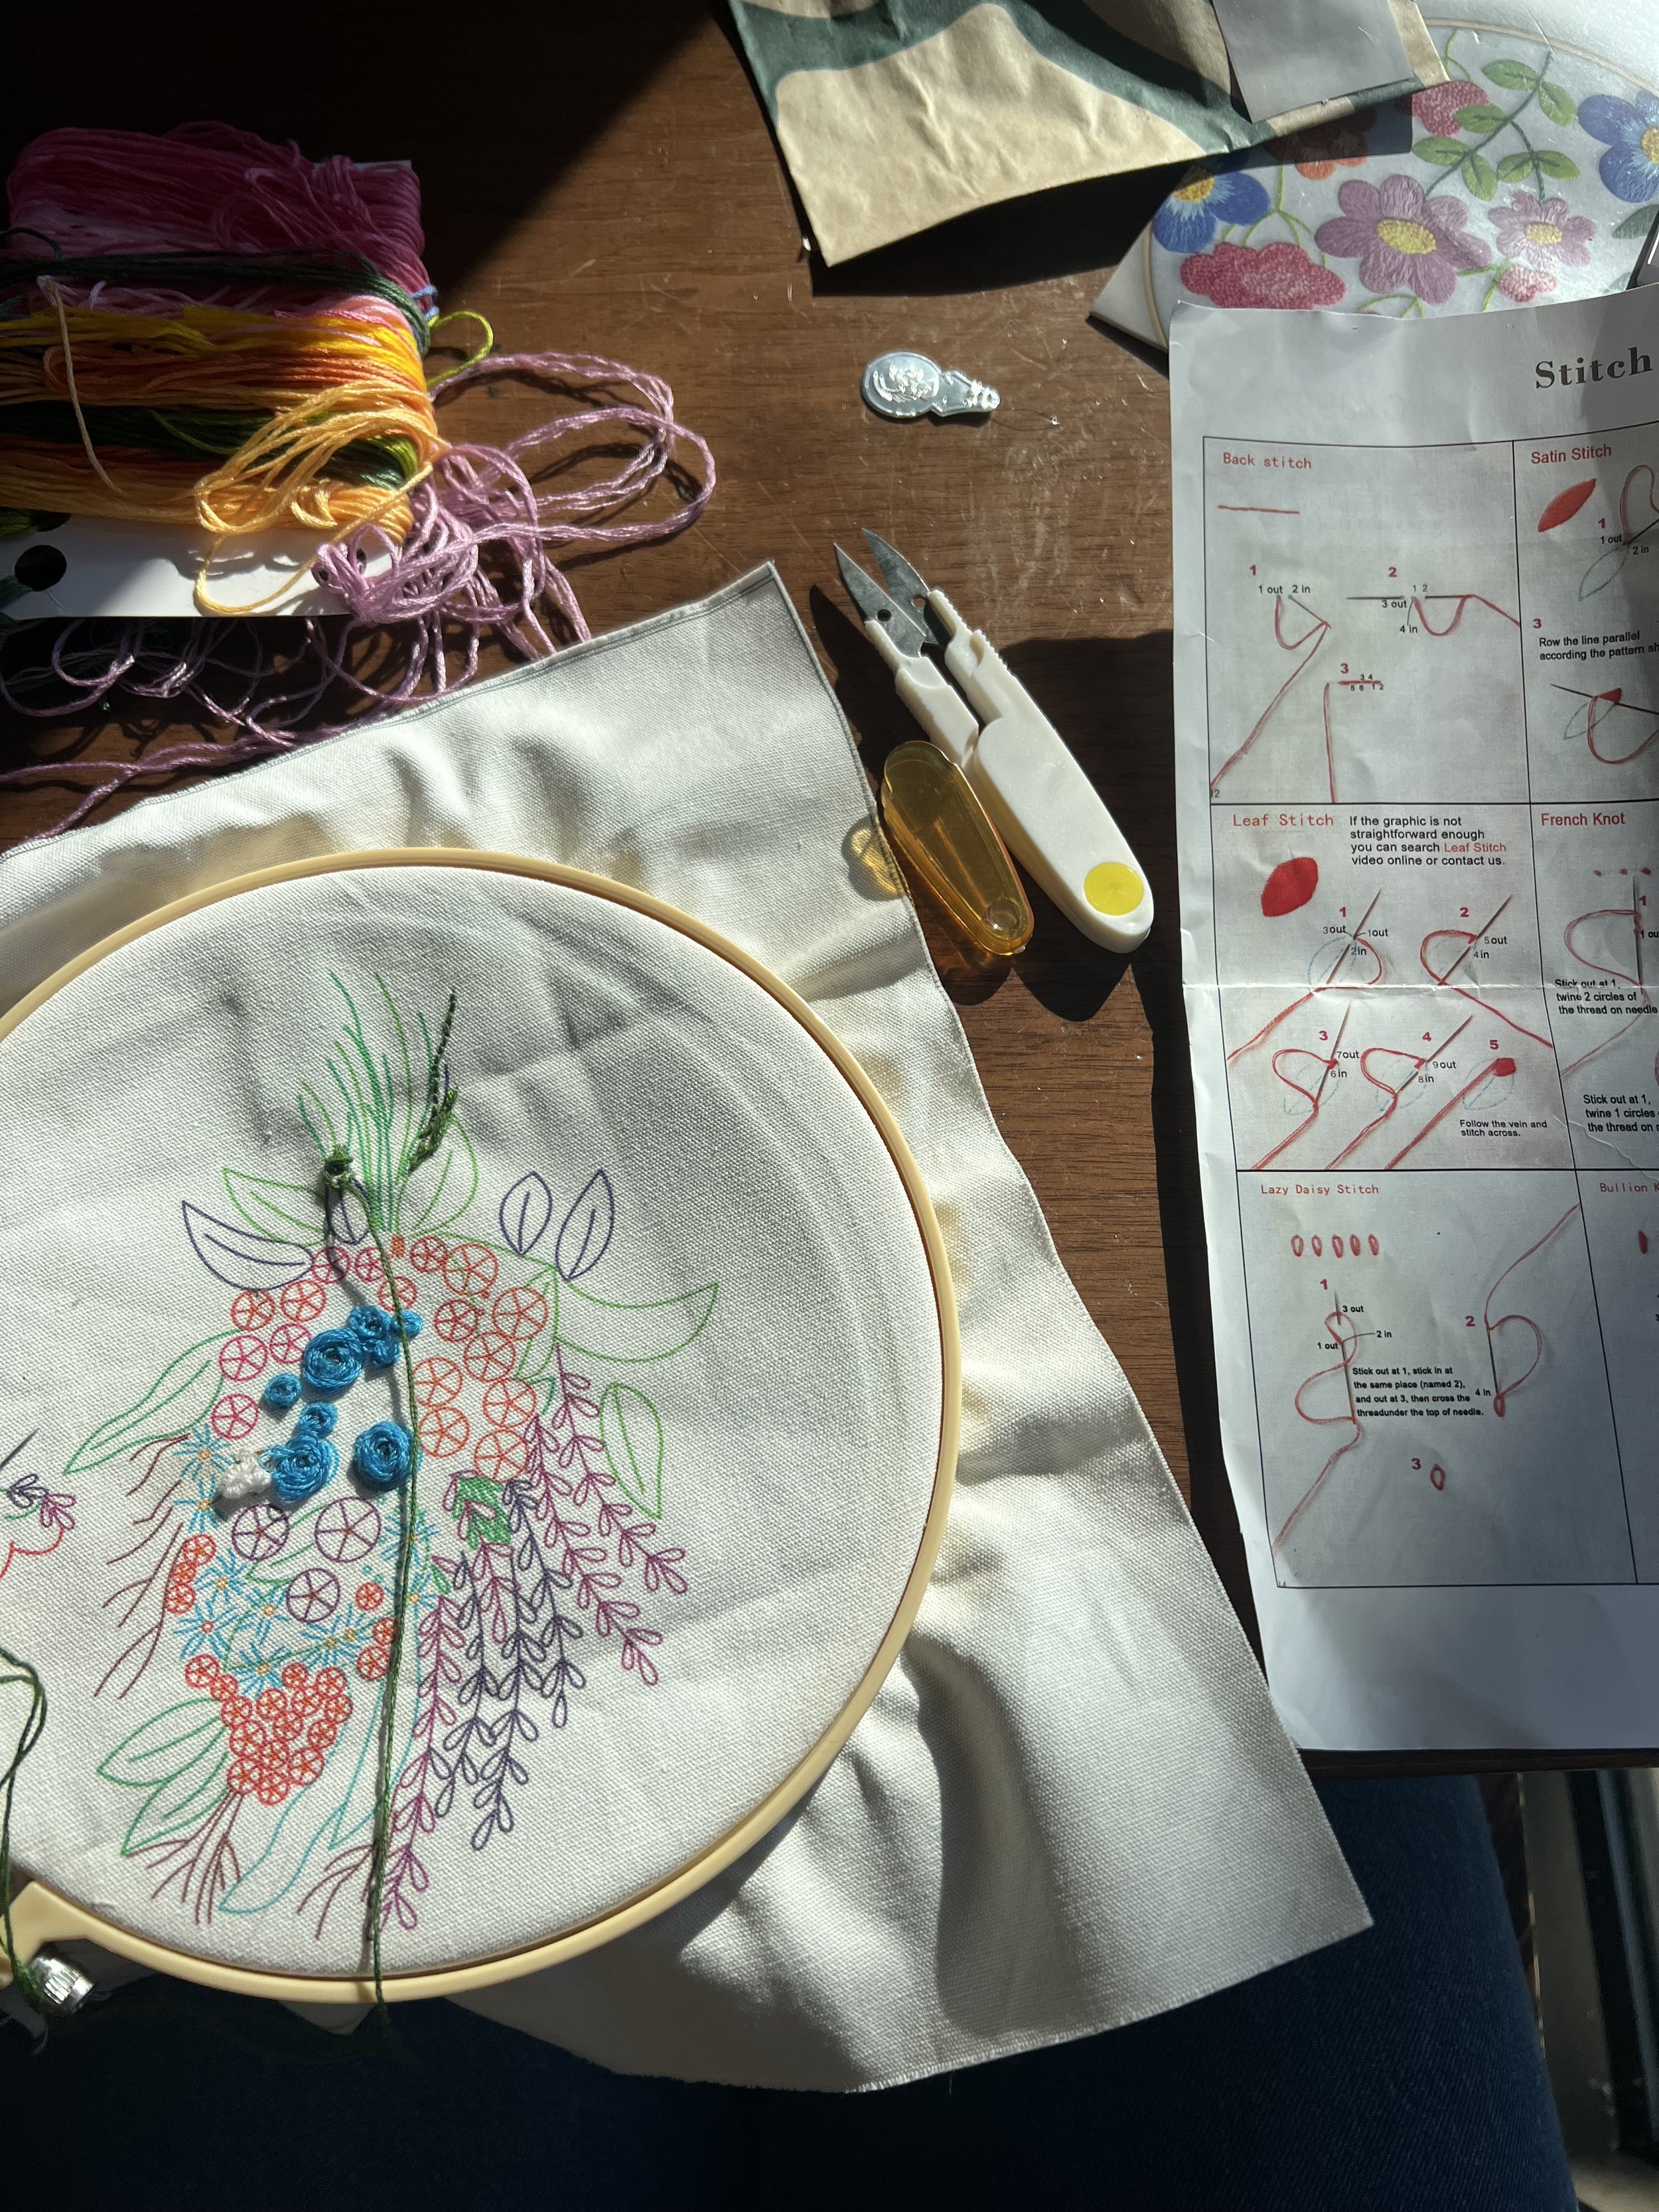 Learning to embroider